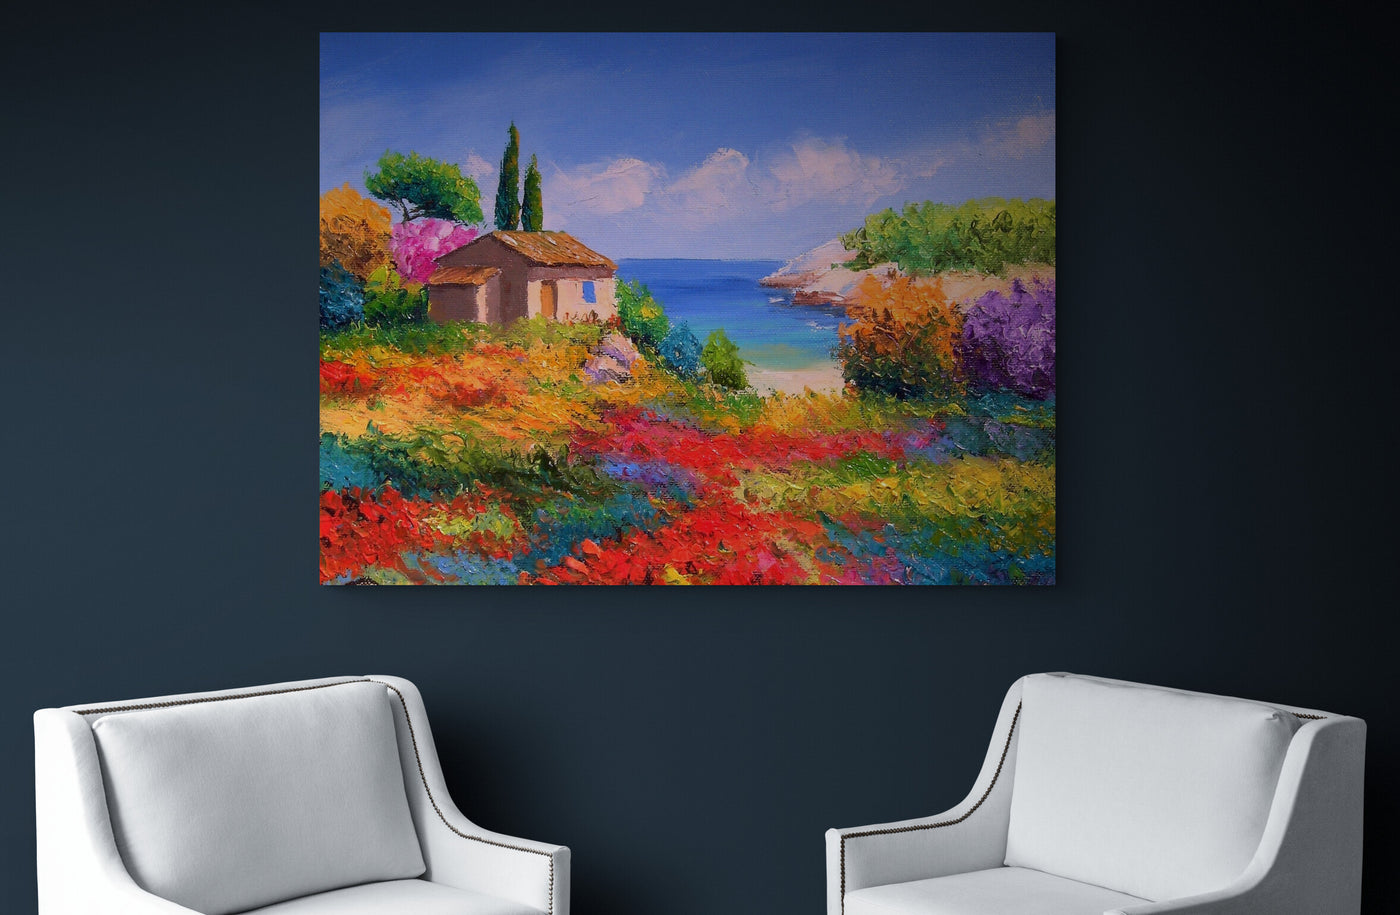 Painting of a House in Tuscany by Jean-Marc Janiaczyk